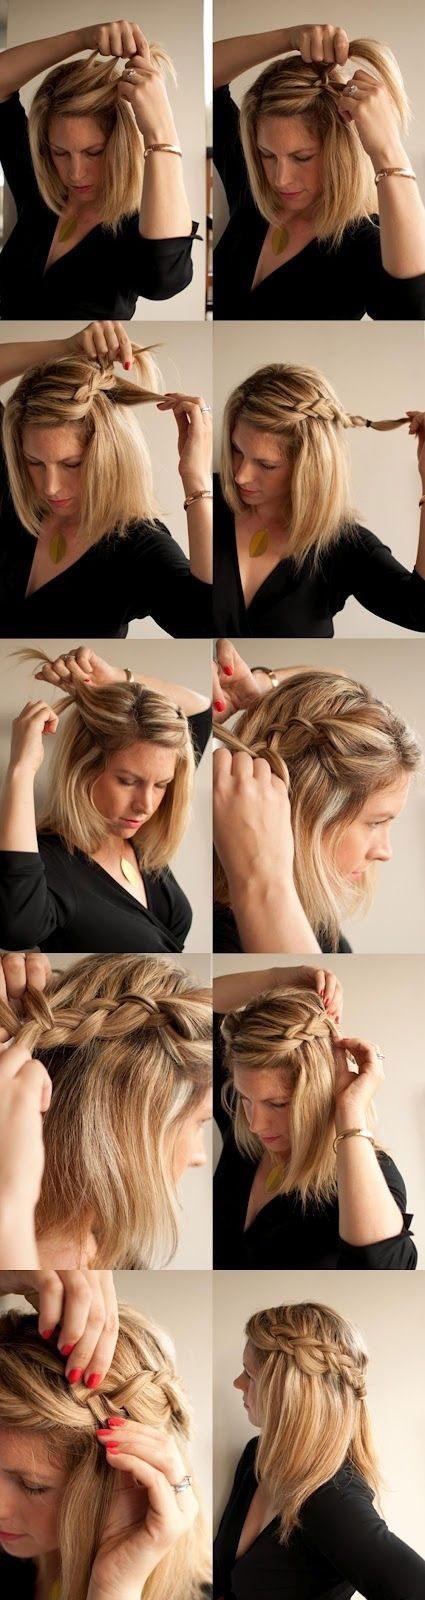 Quick and easy hairstyles for medium length hair quick-and-easy-hairstyles-for-medium-length-hair-98_16